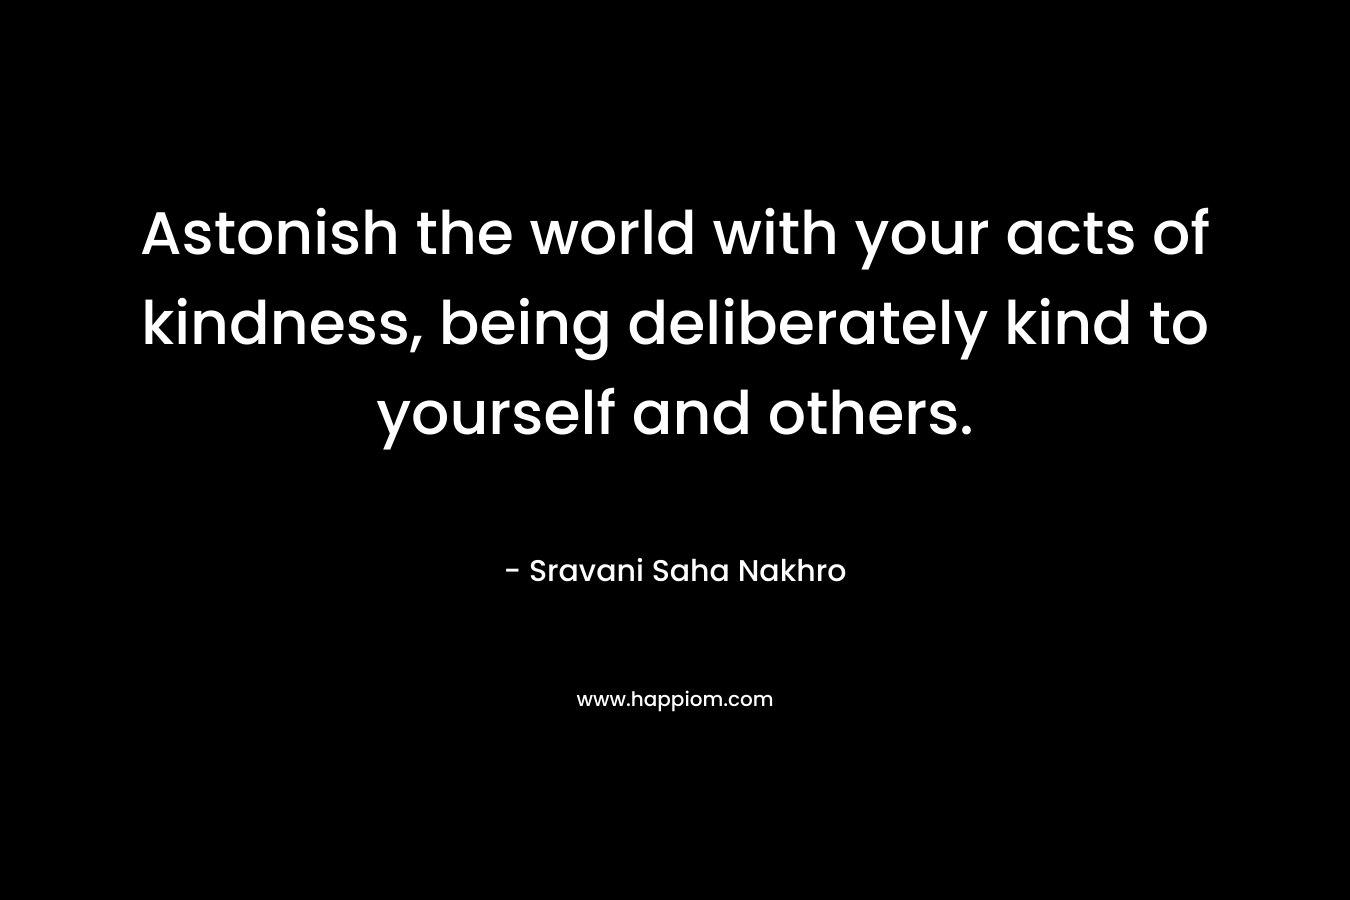 Astonish the world with your acts of kindness, being deliberately kind to yourself and others.